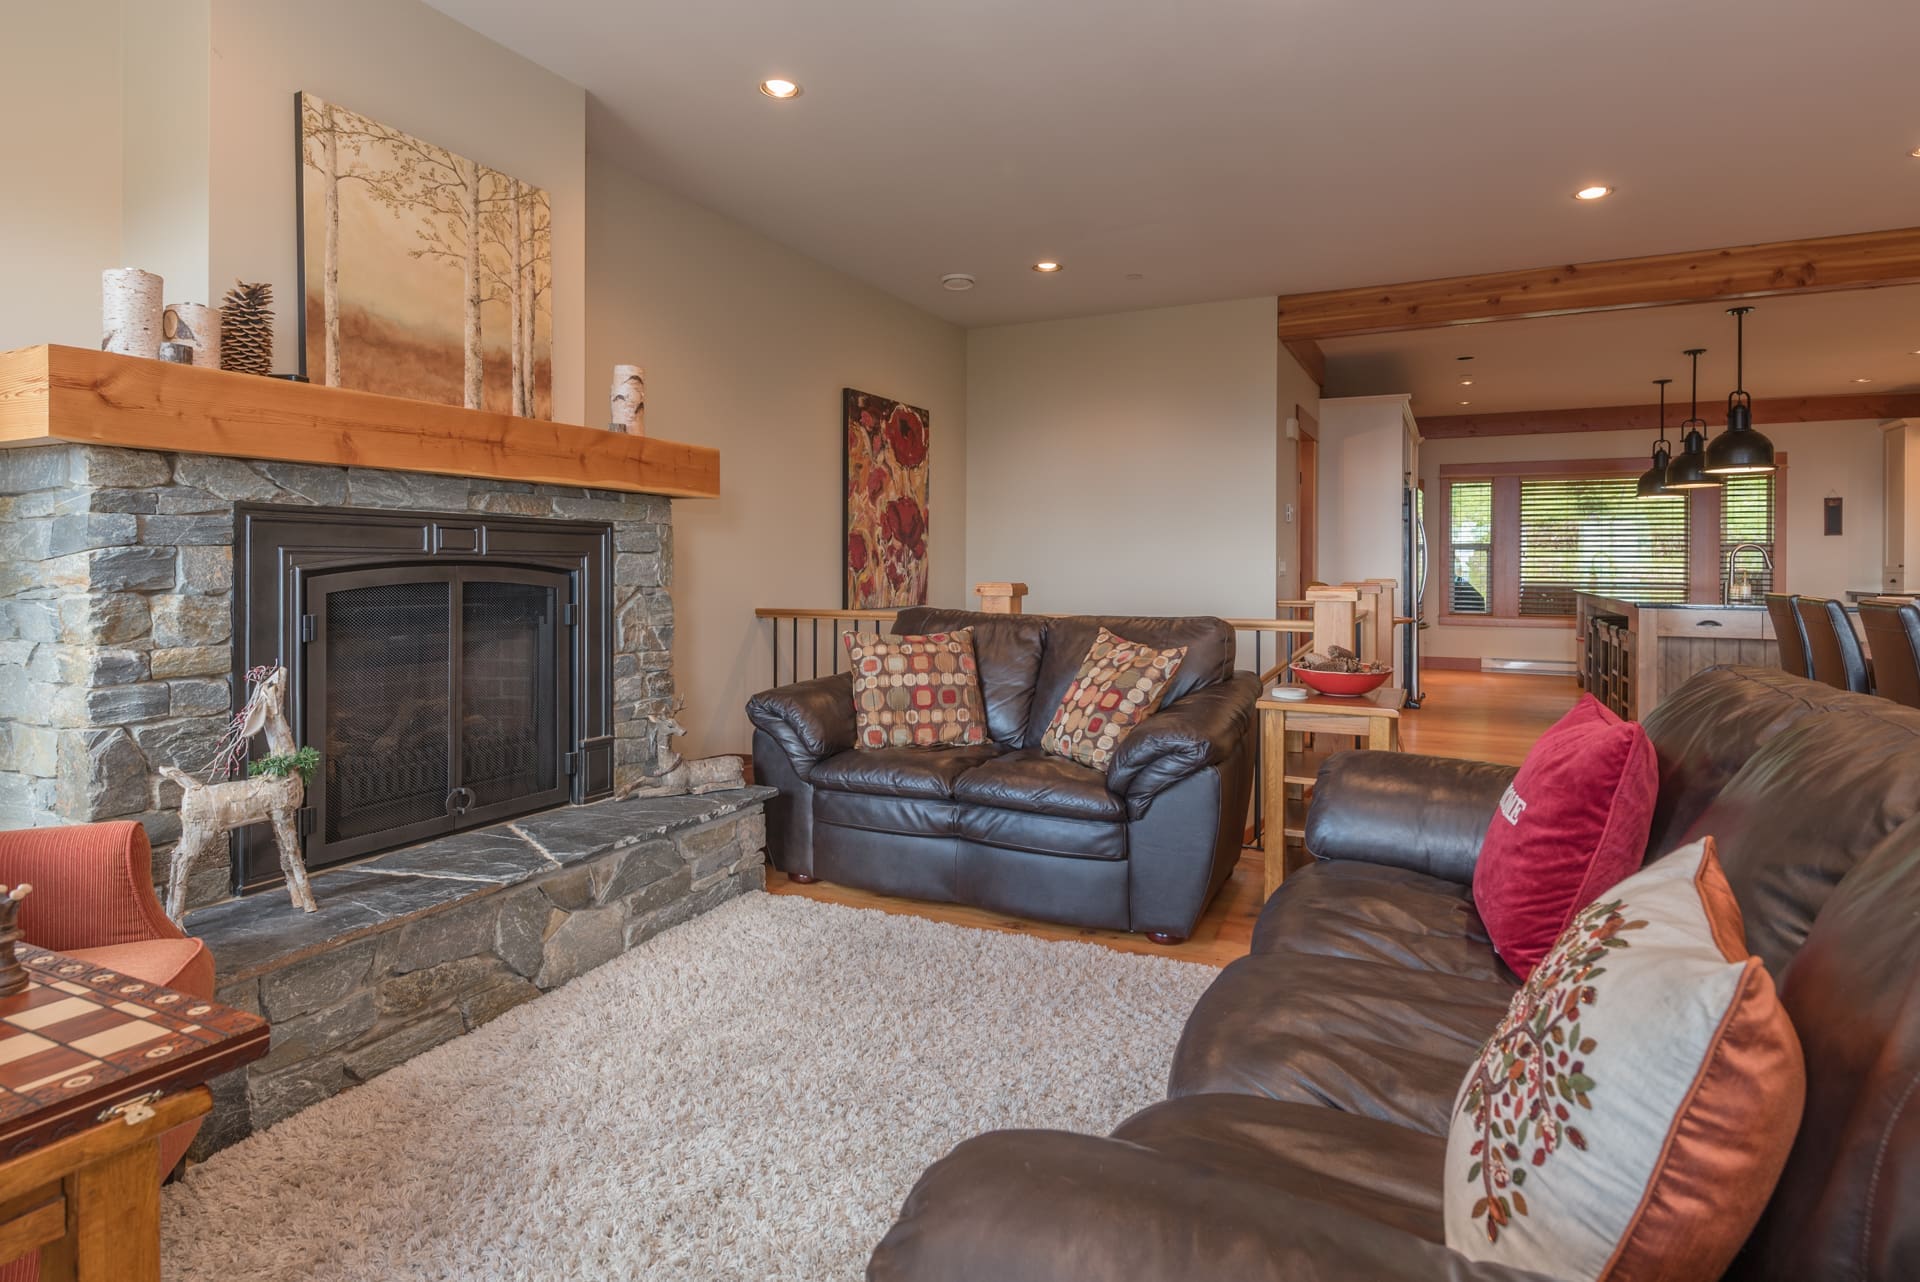 Upper Living room couches with large gas fireplace, large dining area and executive kitchen with all the extras for family and friends. Ski in and out right from the yard into the private hot tub. Private laundry, garage and gear/ski room close to the trails.